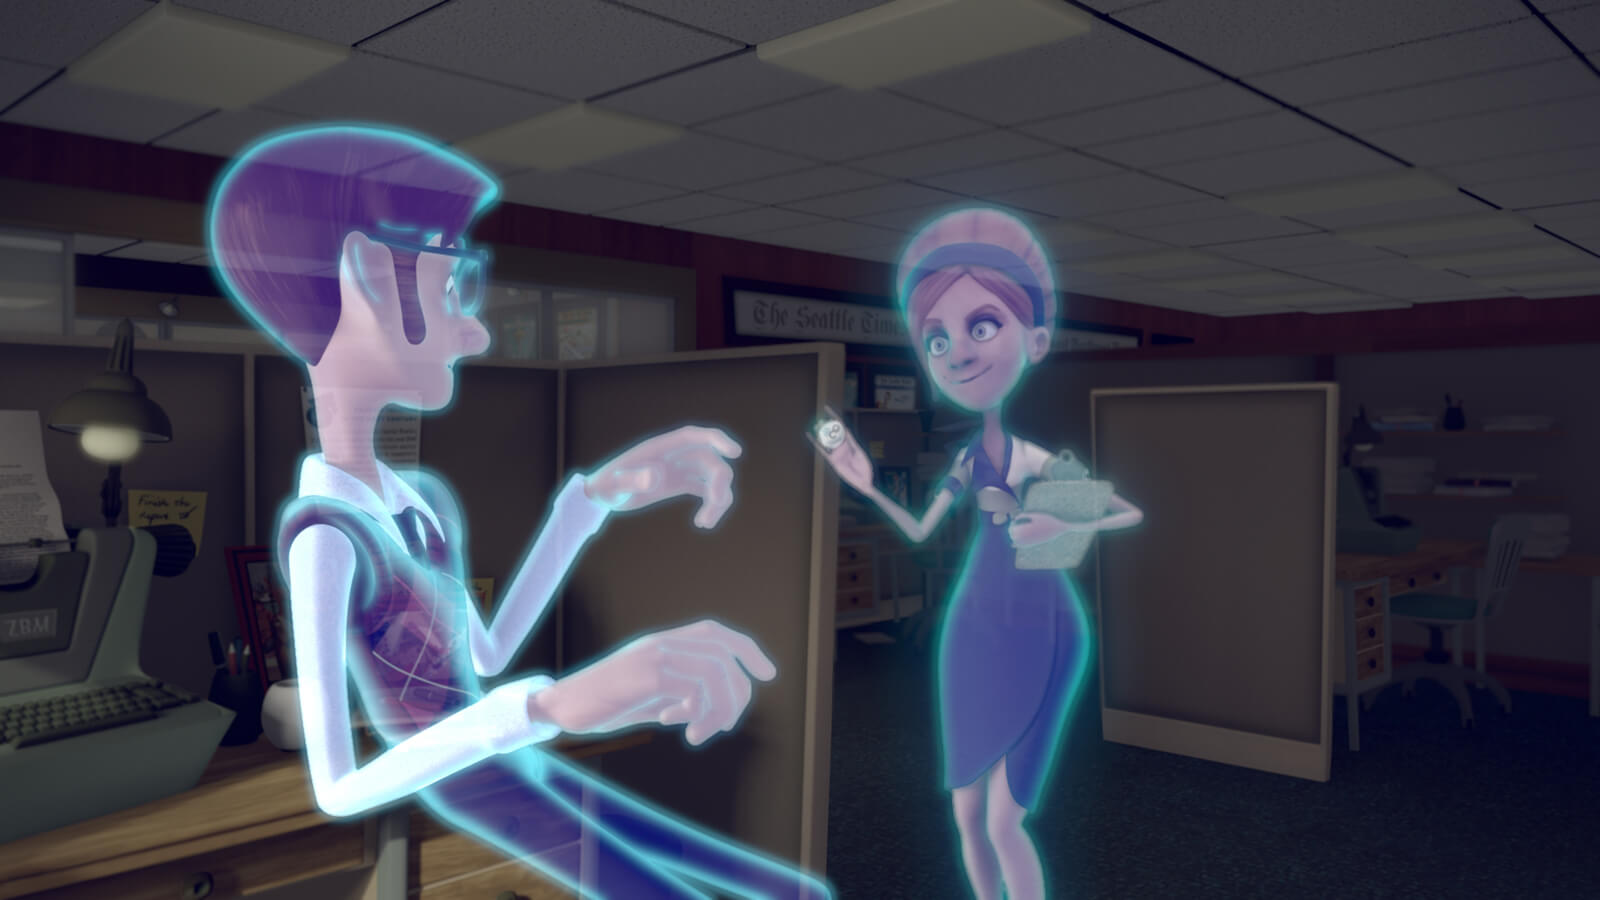 A translucent, glowing blue man retracts from another spectral woman holding a clipboard and a small button to pin on him.